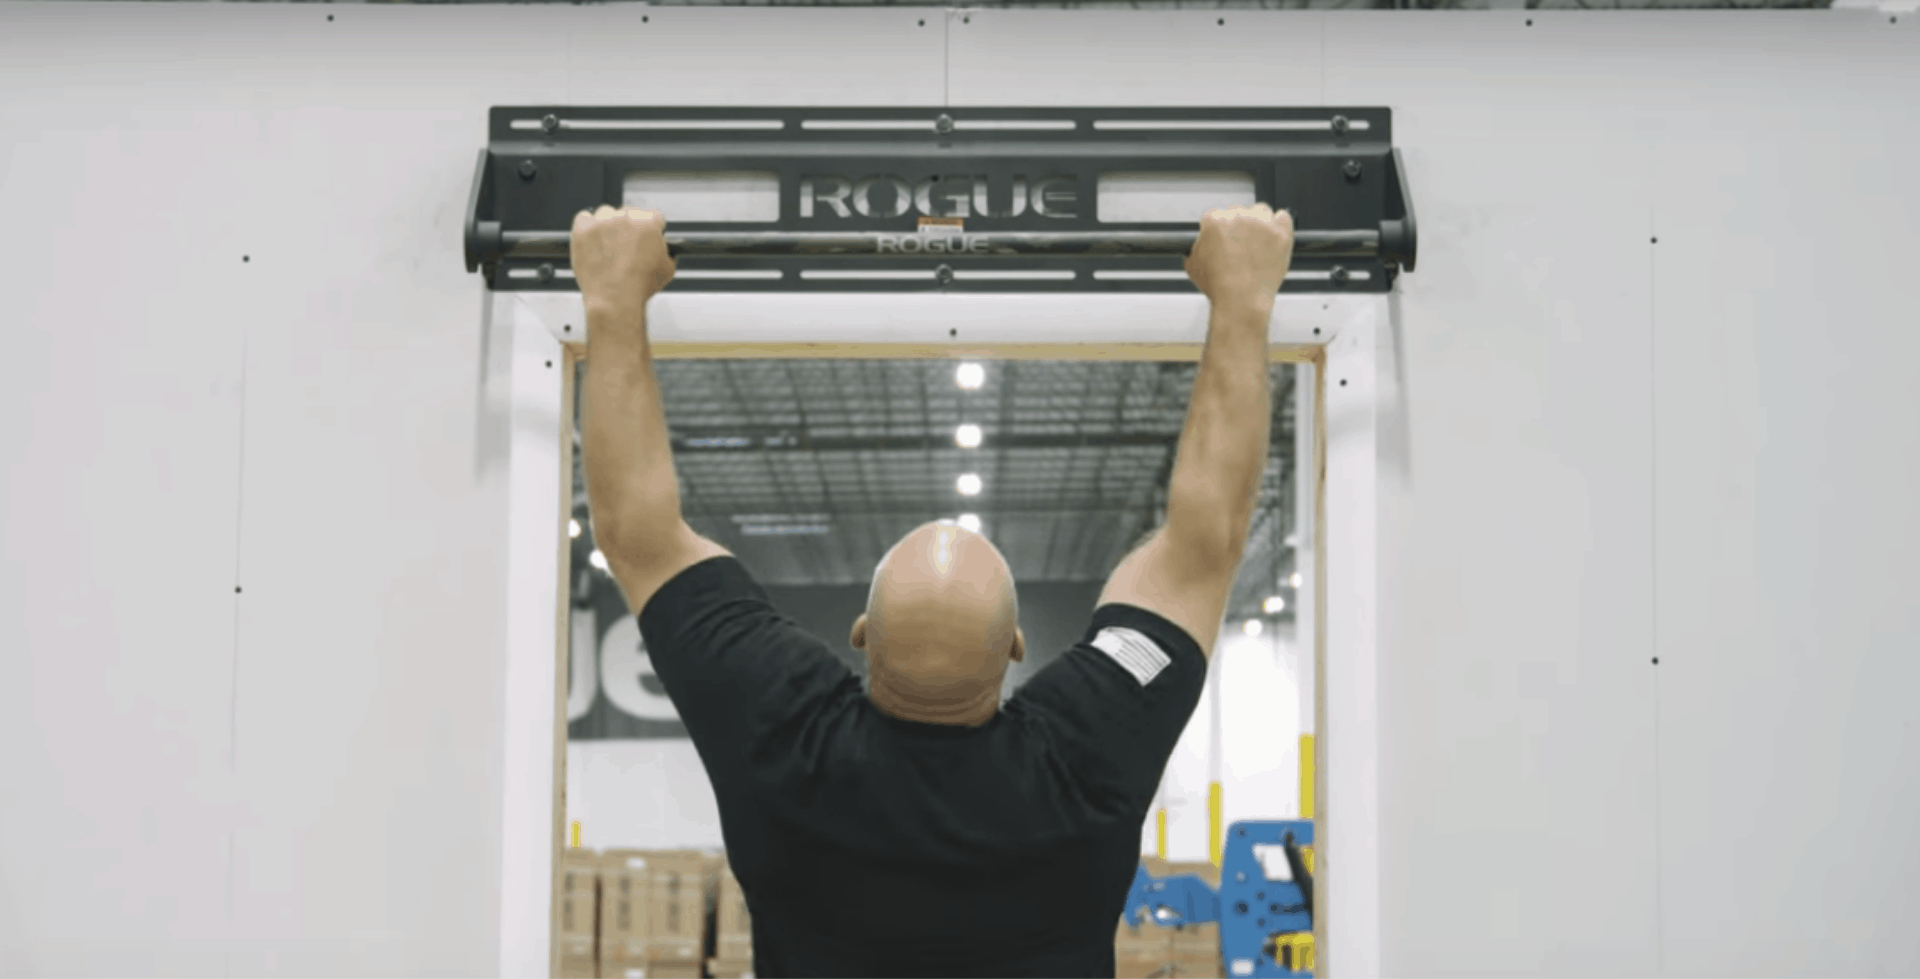 heavy-duty doorway pull up bar by Rogue